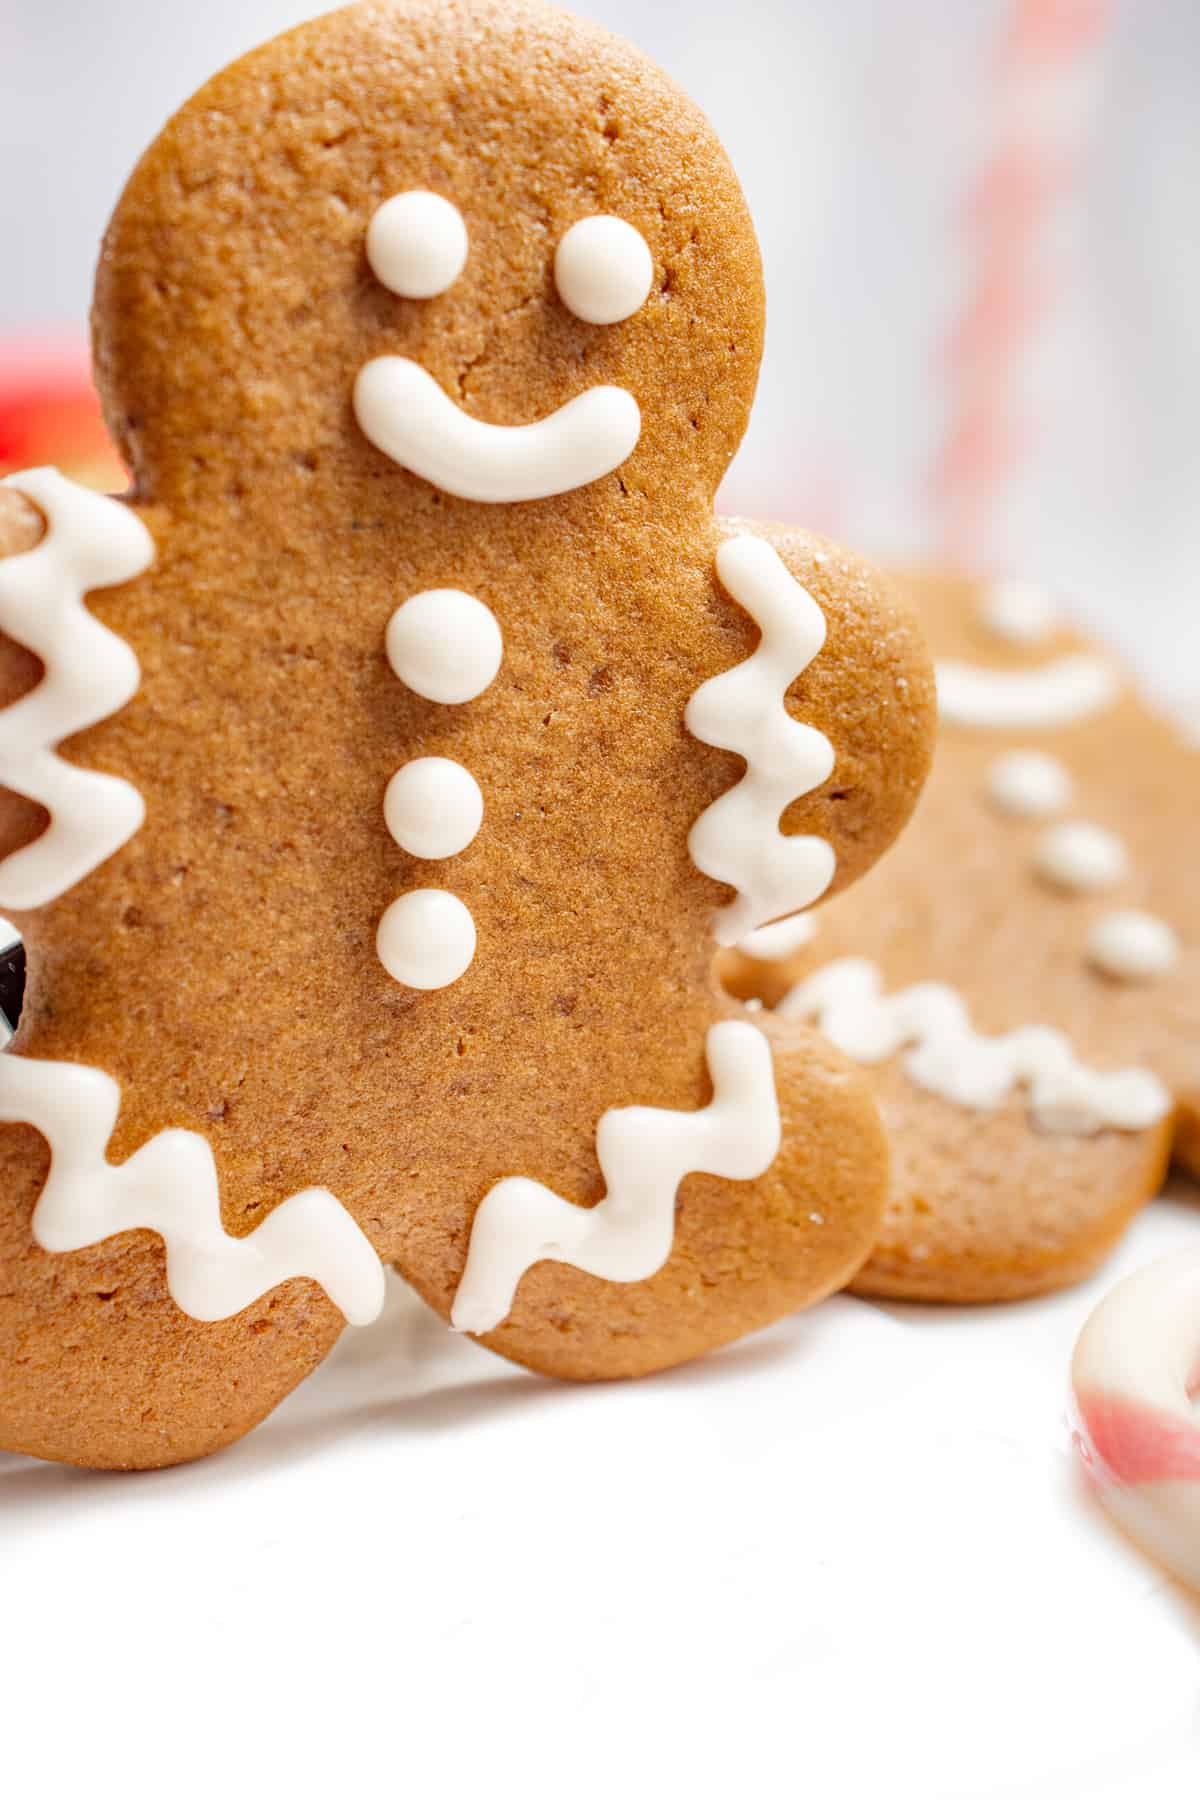 A decorated vegan gingerbread cookie standing up.